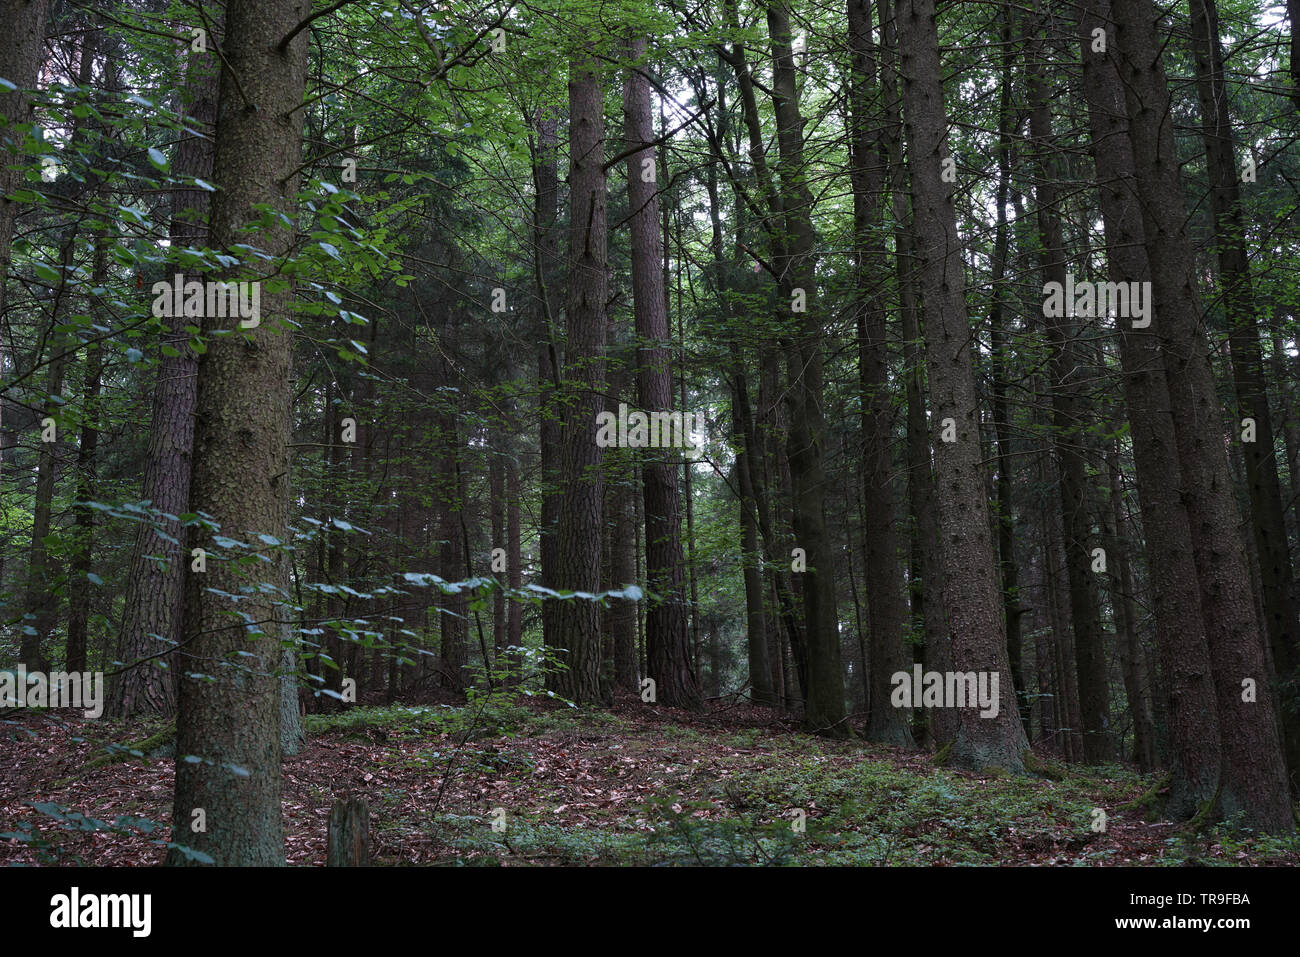 Gloomy landscapes with dark trees photographed on a murky stormy winter afternoon in Germany Stock Photo